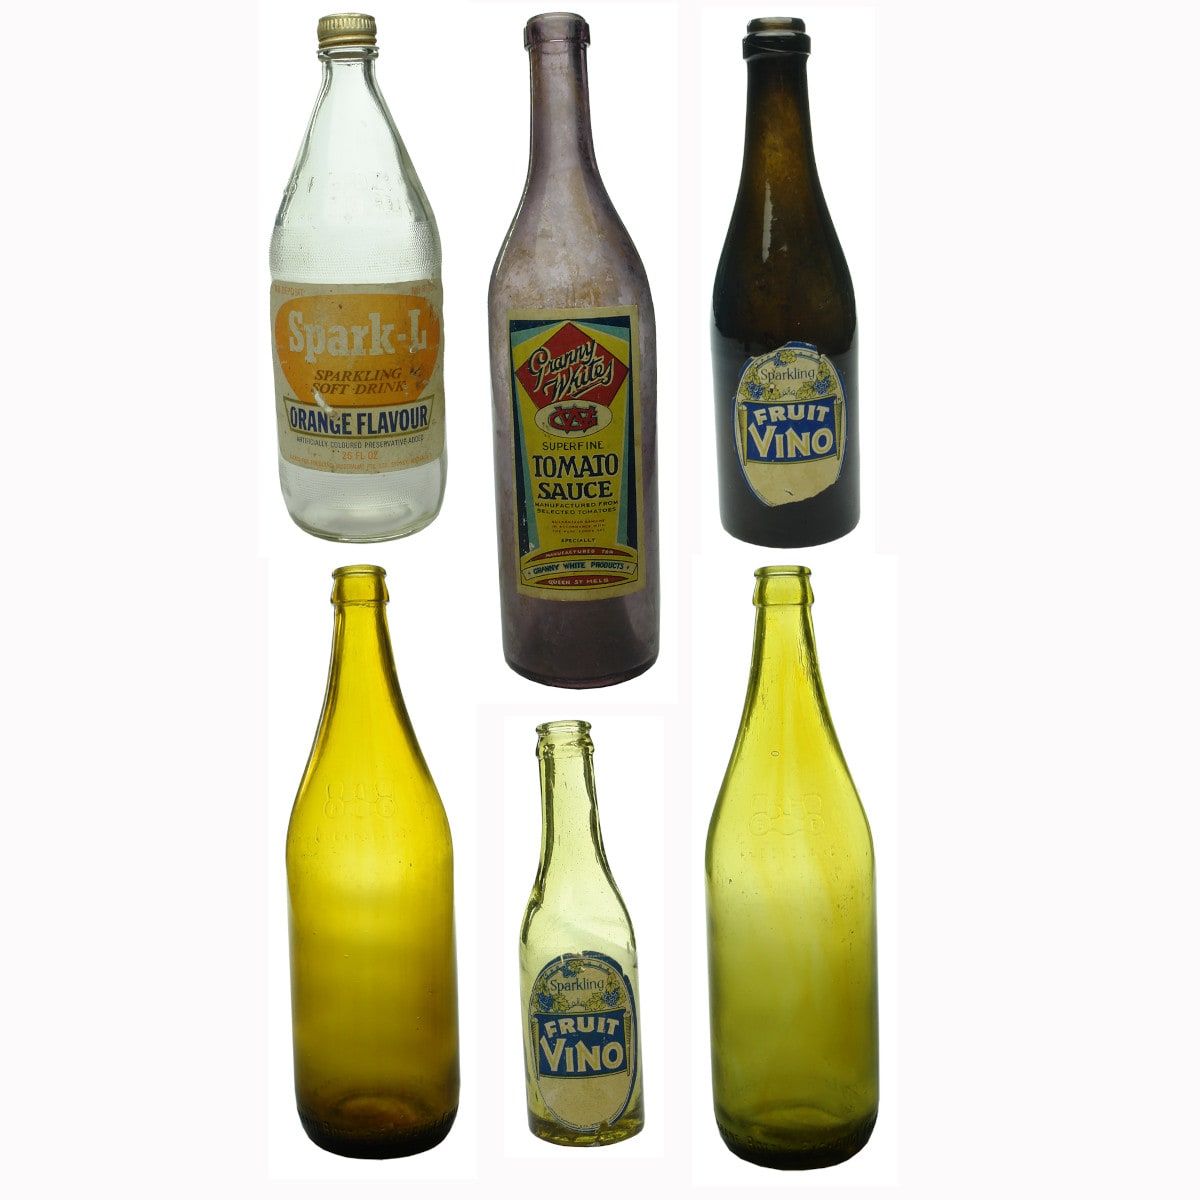 Four labelled bottles and two later BEB beers: Spark-L Orange Flavour labelled One Trippa; Granny Whites Sauce; 2 x Sparkling Fruit Vino; 2 x Honey Amber BEB modern beers.